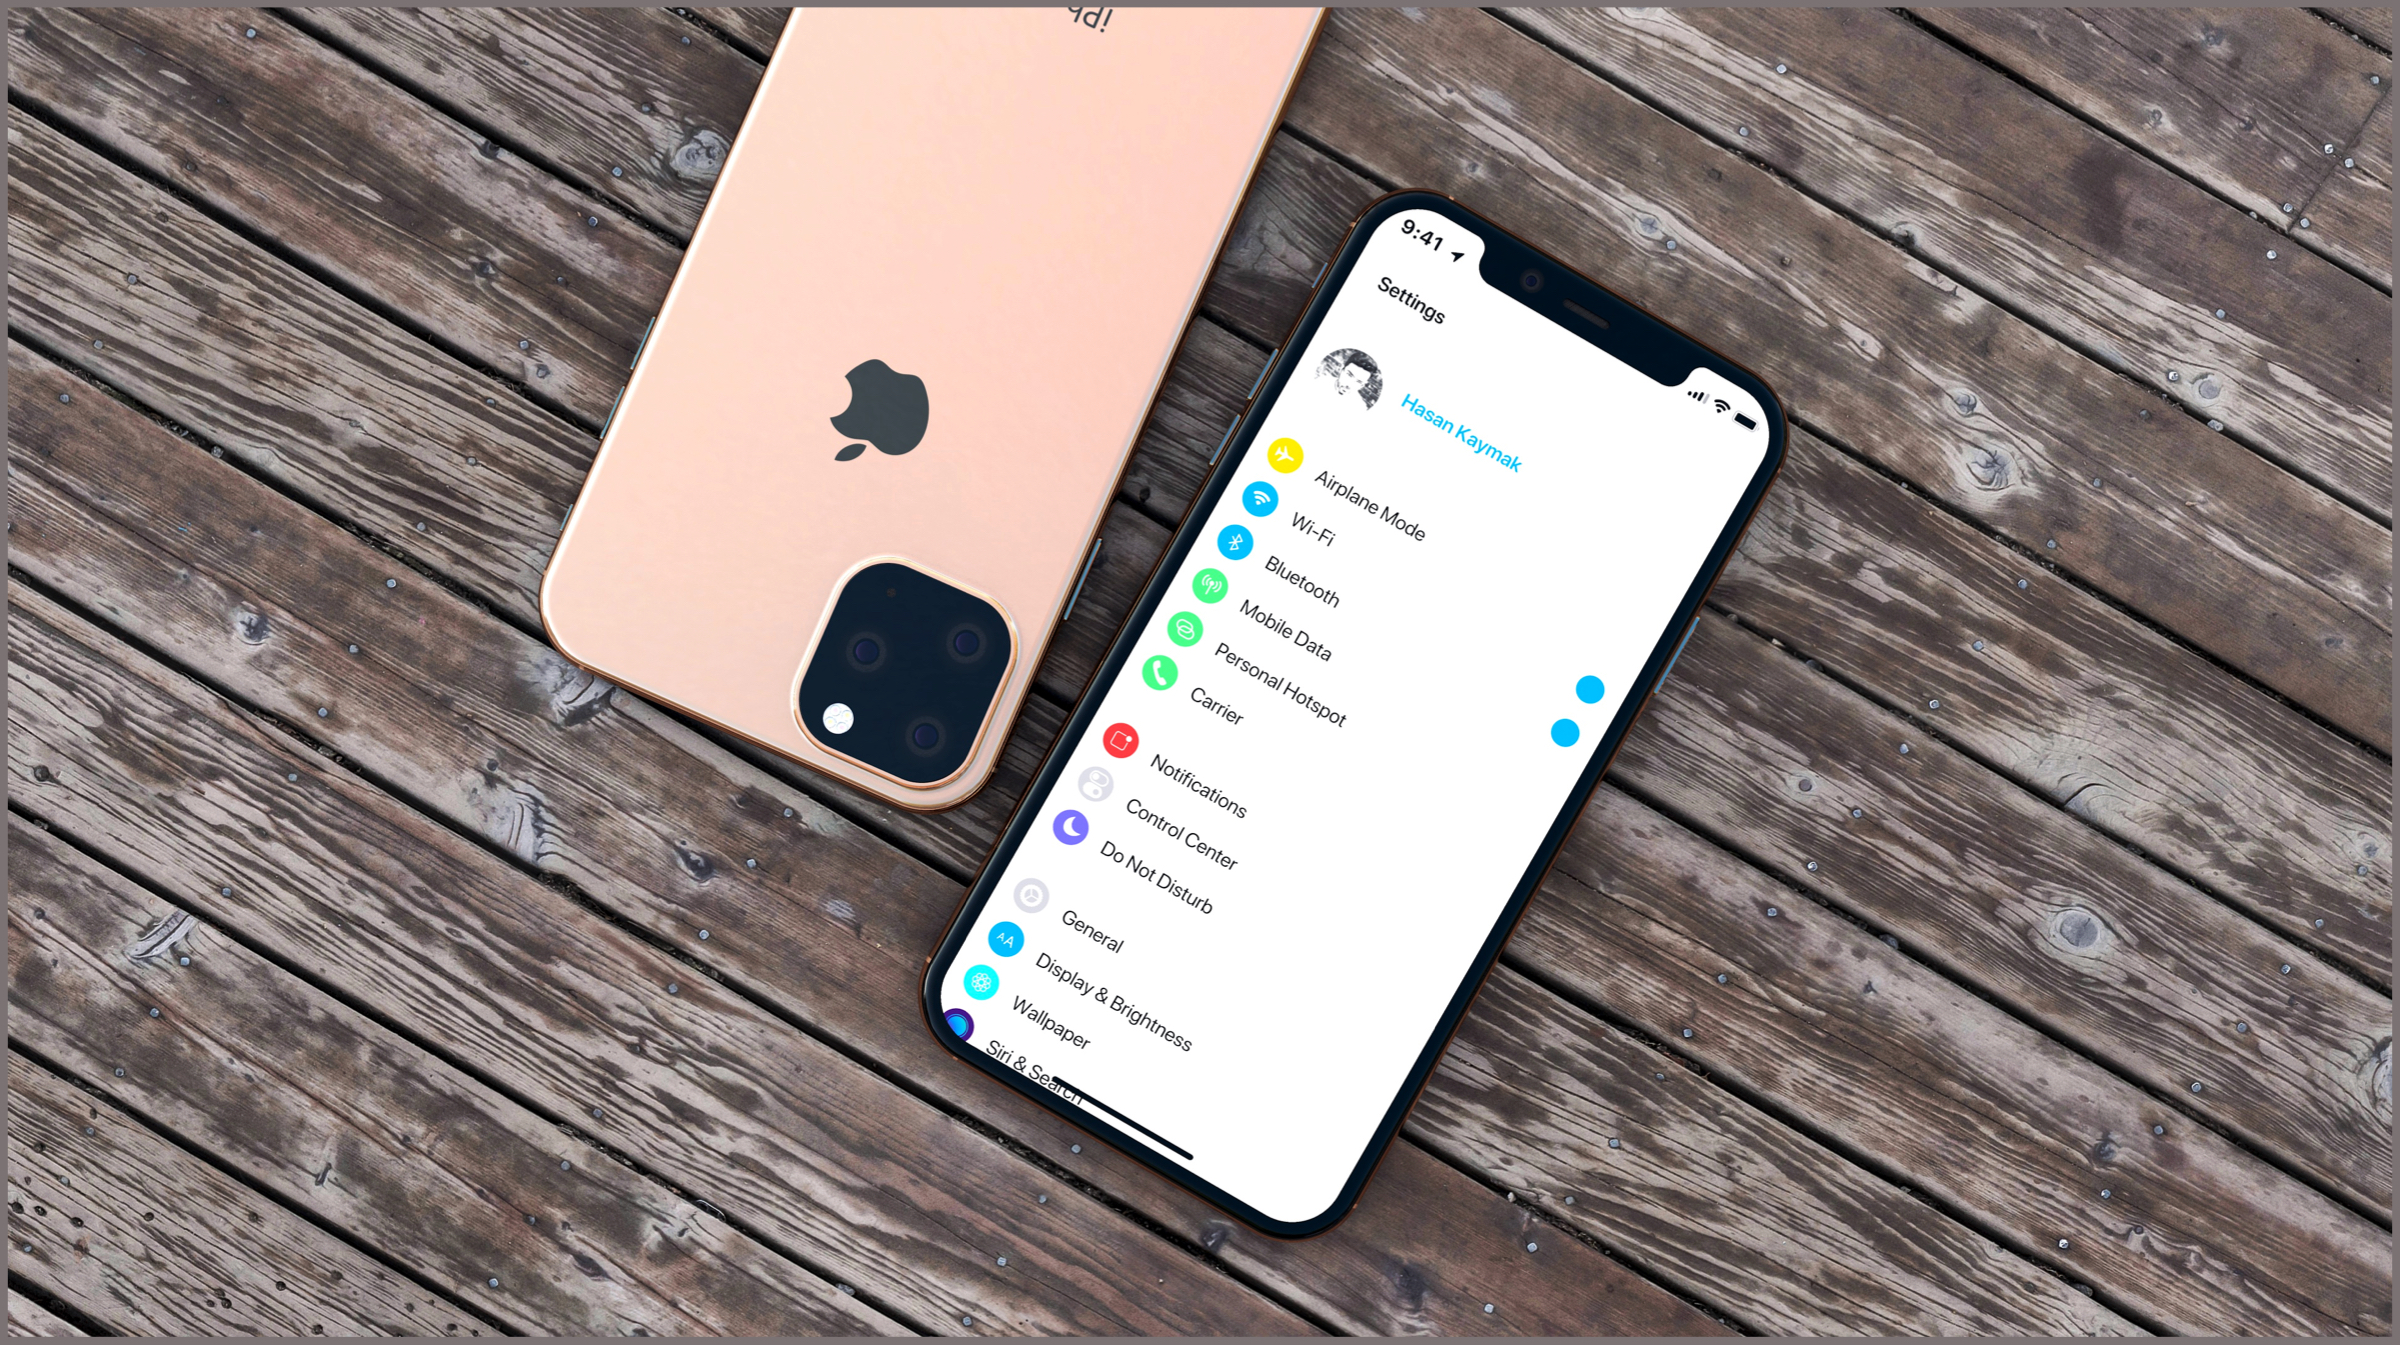 Apple"width =" 2400 "height =" 1345 "srcset =" https://www.igyaan.in/wp-content/uploads/2019/05/Apple-iPhone-11-Khái niệm-2.jpg 2400w, https://www.igyaan.in/wp-content/uploads/2019/05/Apple-iPhone-11-Khái niệm-2-300x168.jpg 300w, https://www.igyaan.in/wp-content/uploads/2019/05/Apple-iPhone-11-Khái niệm-2-320x179.jpg 320w, https://www.igyaan.in/wp-content/uploads/2019/05/Apple-iPhone-11-Khái niệm-2-768x430.jpg 768w, https://www.igyaan.in/wp-content/uploads/2019/05/Apple-iPhone-11-Khái niệm-2-1100x616.jpg 1100w, https://www.igyaan.in/wp-content/uploads/2019/05/Apple-iPhone-11-Khái niệm-2-600x336.jpg 600w, https://www.igyaan.in/wp-content/uploads/2019/05/Apple-iPhone-11-Khái niệm-2-200x112.jpg 200w, https://www.igyaan.in/wp-content/uploads/2019/05/Apple-iPhone-11-Khái niệm-2-20x11.jpg 20w, https://www.igyaan.in/wp-content/uploads/2019/05/Apple-iPhone-11-Khái niệm-2-40x22.jpg 40w, https://www.igyaan.in/wp-content/uploads/2019/05/Apple-iPhone-11-Khái niệm-2-80x45.jpg 80w, https://www.igyaan.in/wp-content/uploads/2019/05/Apple-iPhone-11-Khái niệm-2-1000x560.jpg 1000w, https://www.igyaan.in/wp-content/uploads/2019/05/Apple-iPhone-11-Khái niệm-2-1200x673.jpg 1200w "size =" (max-width: 2400px) 100vw, 2400px "/><p id=